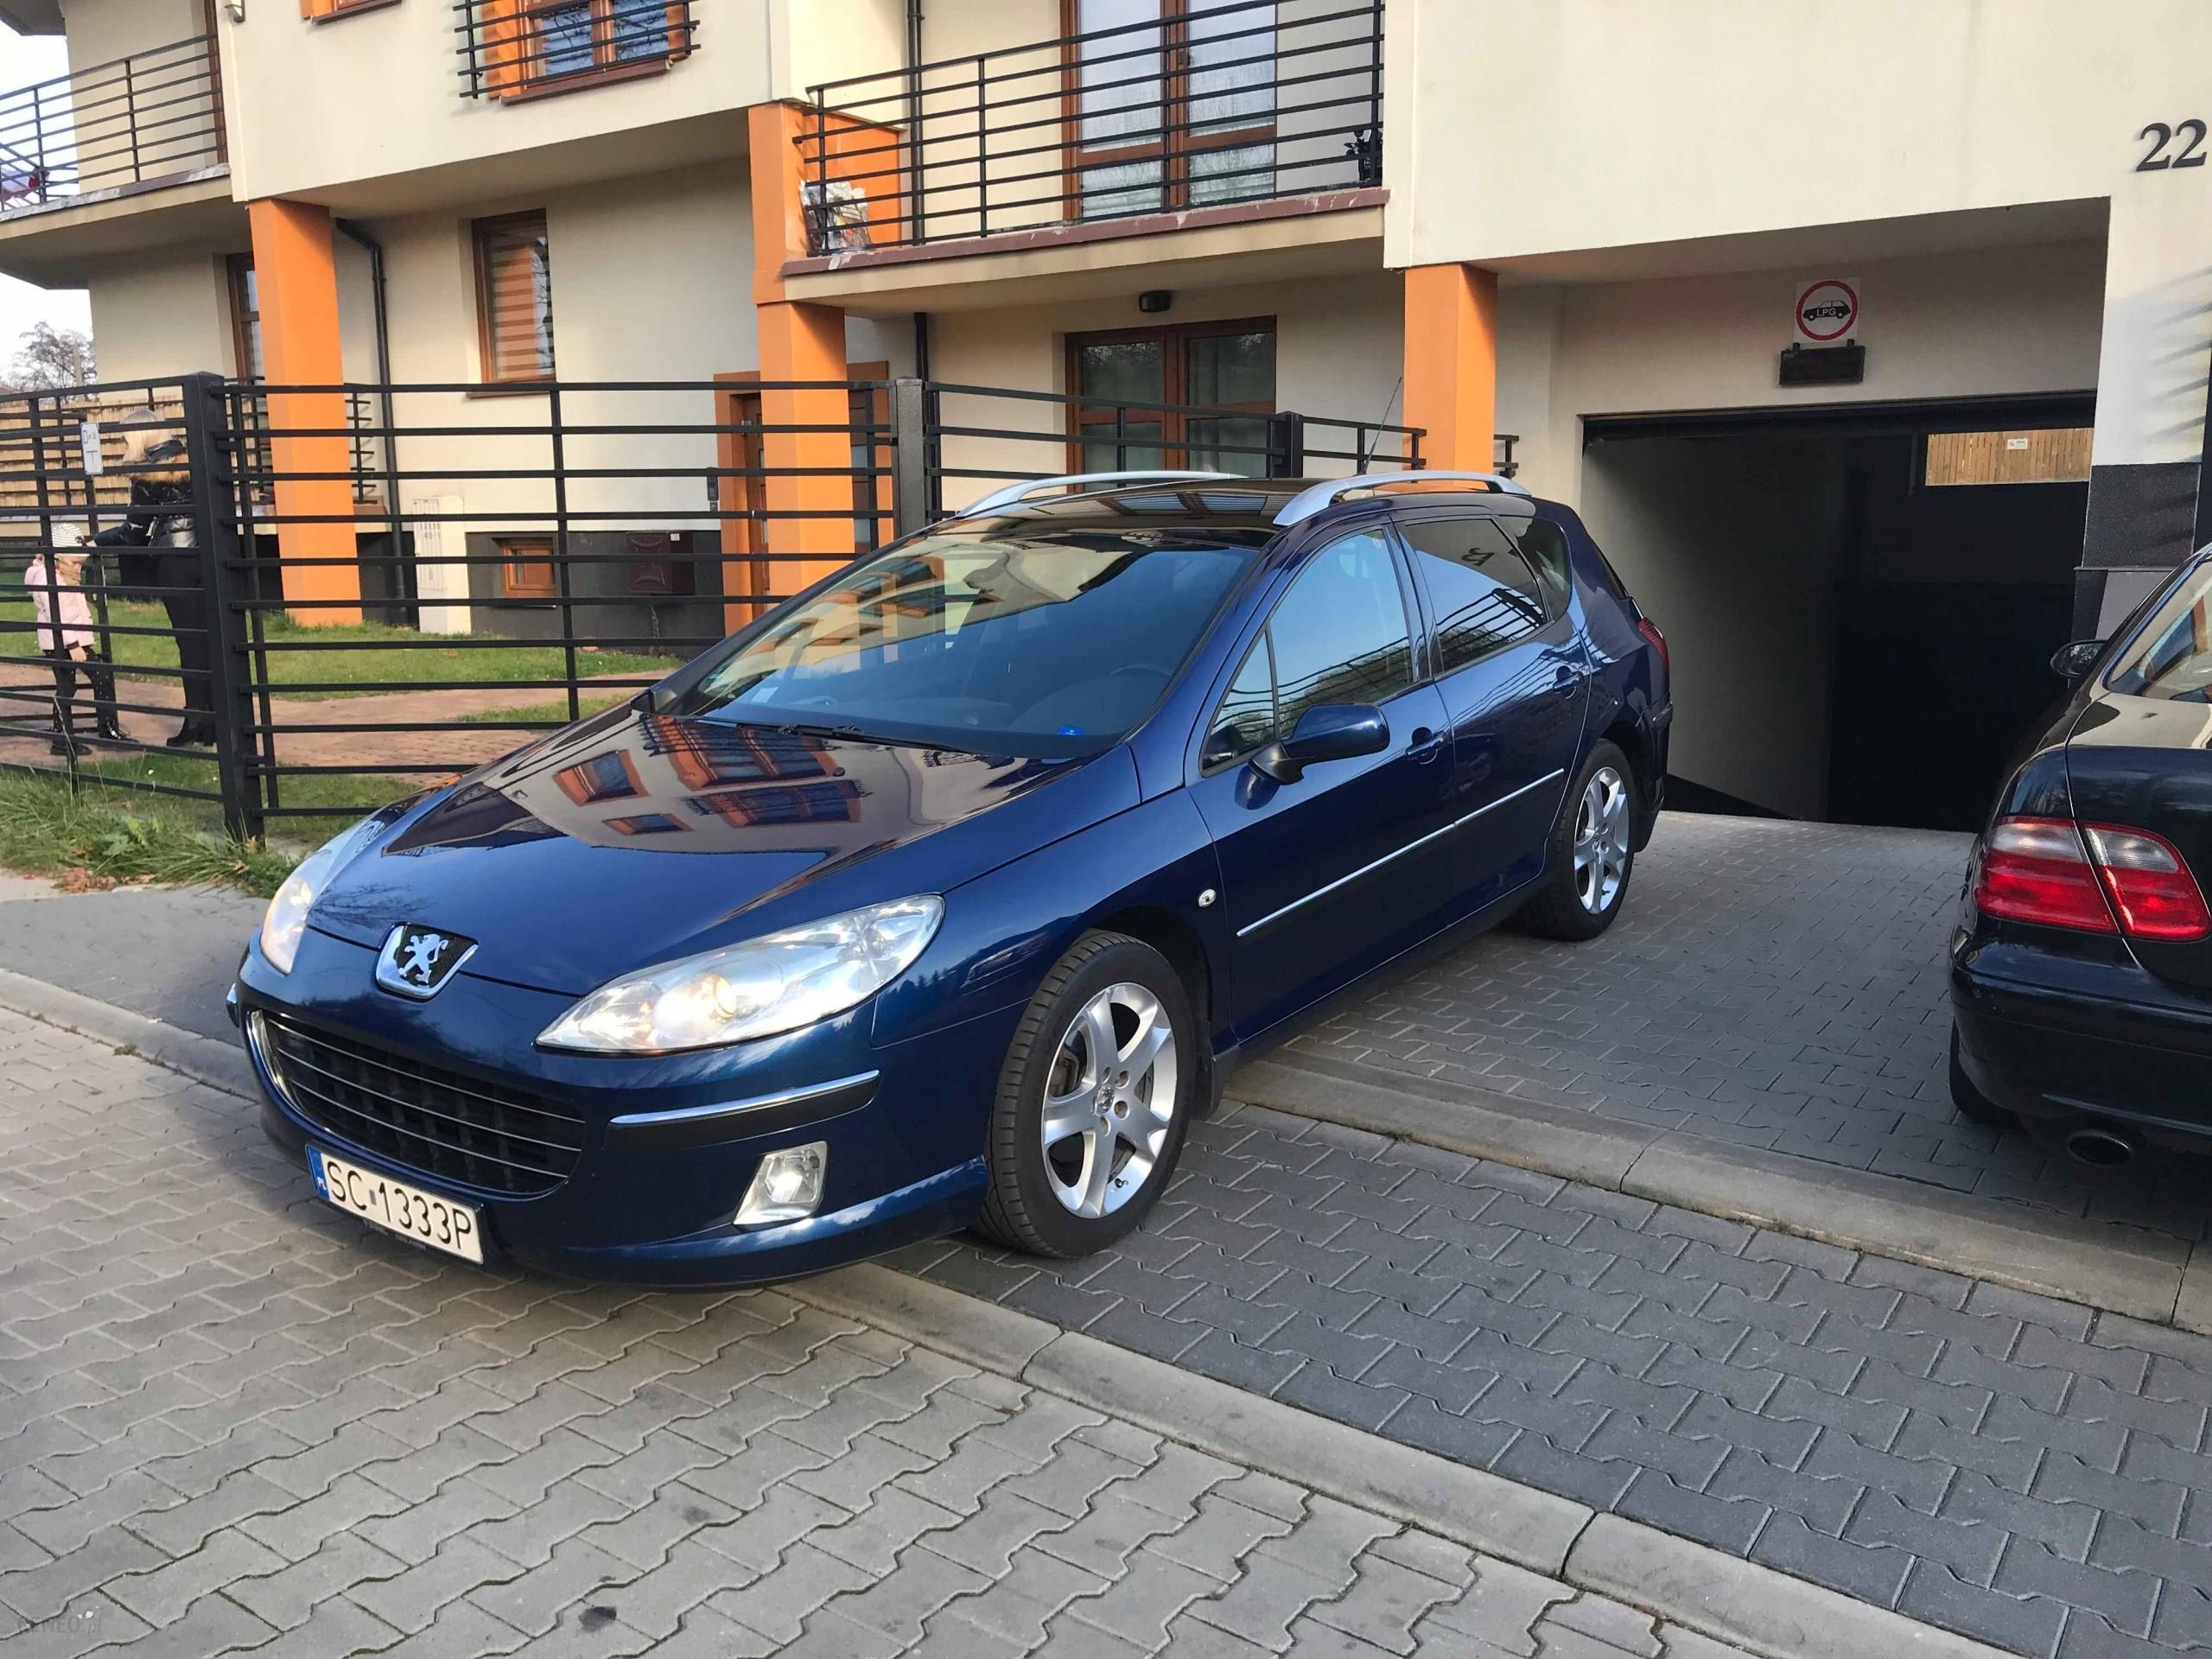 Peugeot 407 Sw 2.0 Hdi 136Km Automat Panorama - Opinie I Ceny Na Ceneo.pl